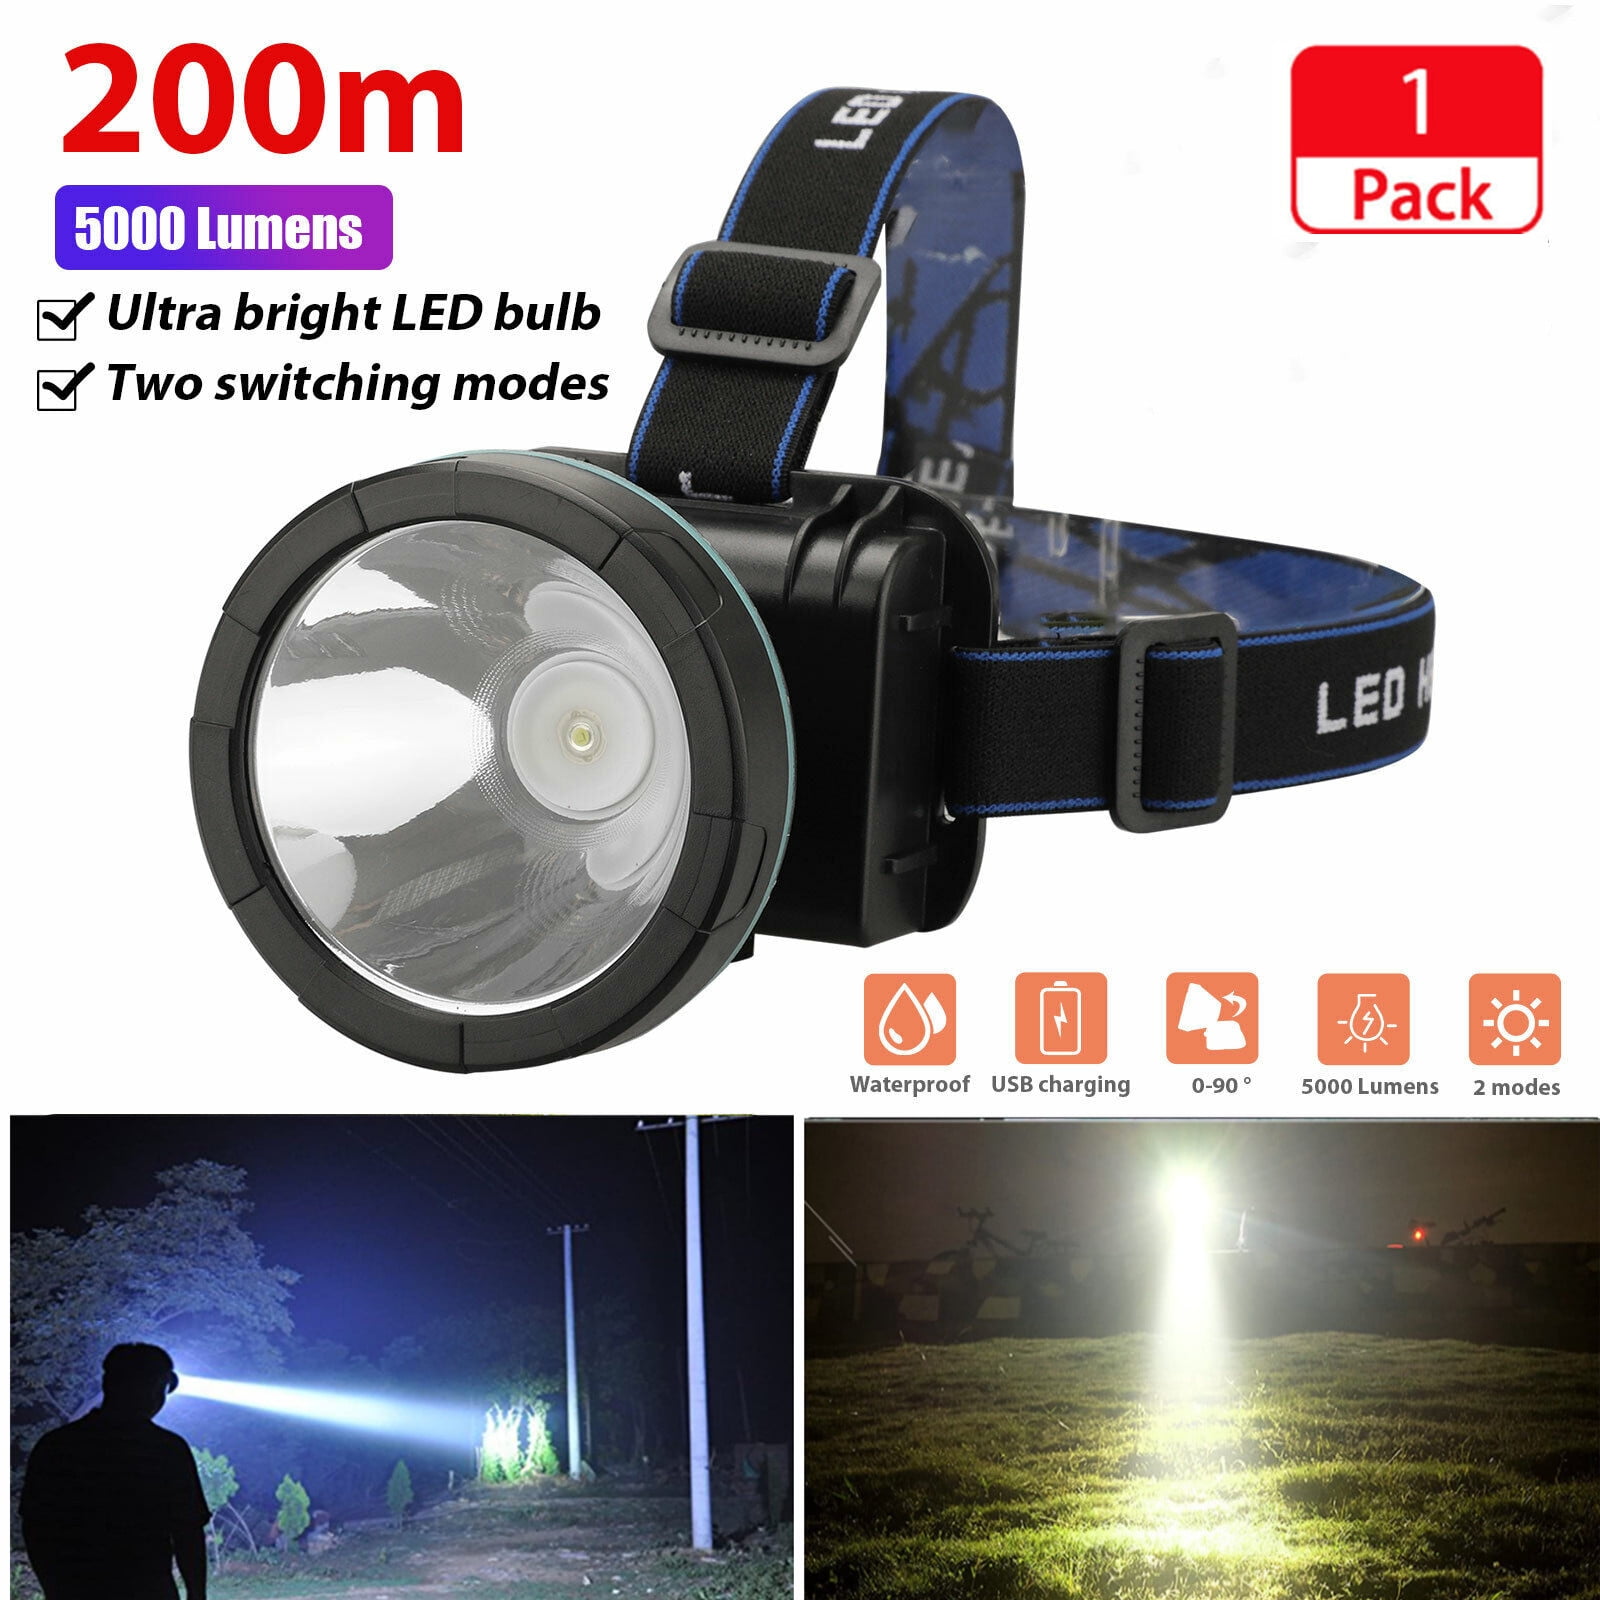 Running Fishing Headlamp- Brightest Rechargeable LED Headlamp Flashlight- 1200 Lumens- Headlamps for Camping Wall Charger Outdoors- Waterproof- Zoomable- Includes 2 18650 Batteries Car Charger GoGreen Gear 